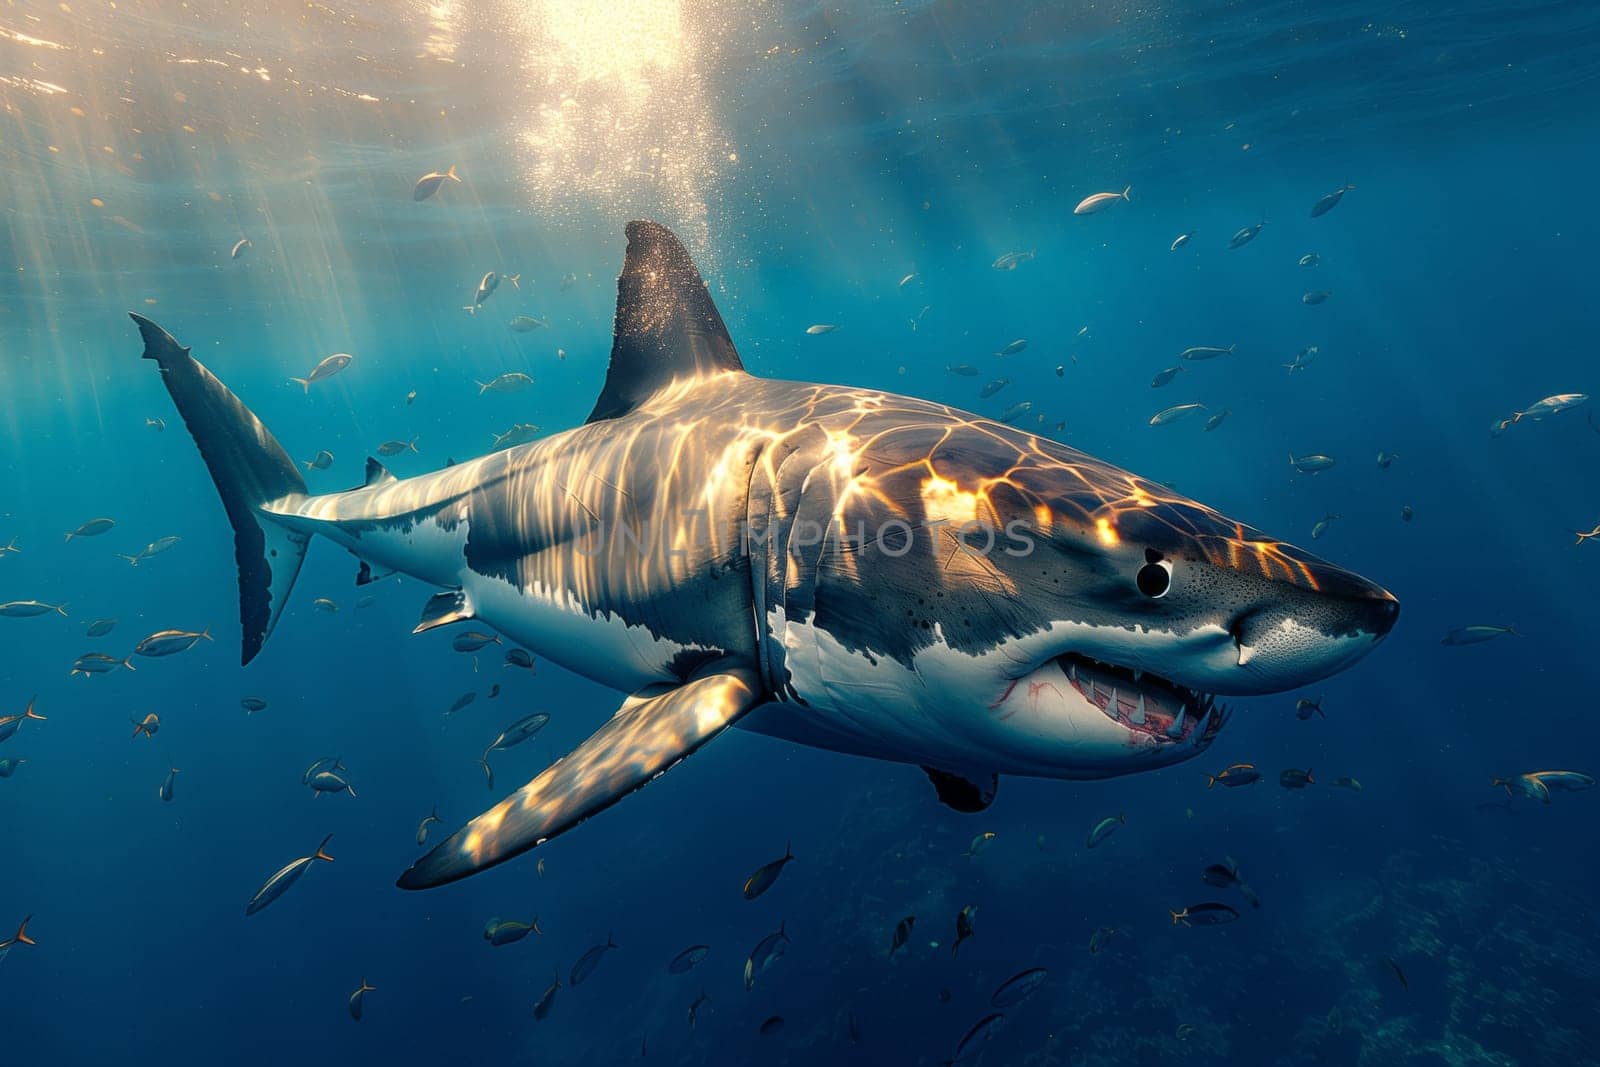 A Lamnidae shark swims in the water, belonging to the Lamniformes order by richwolf